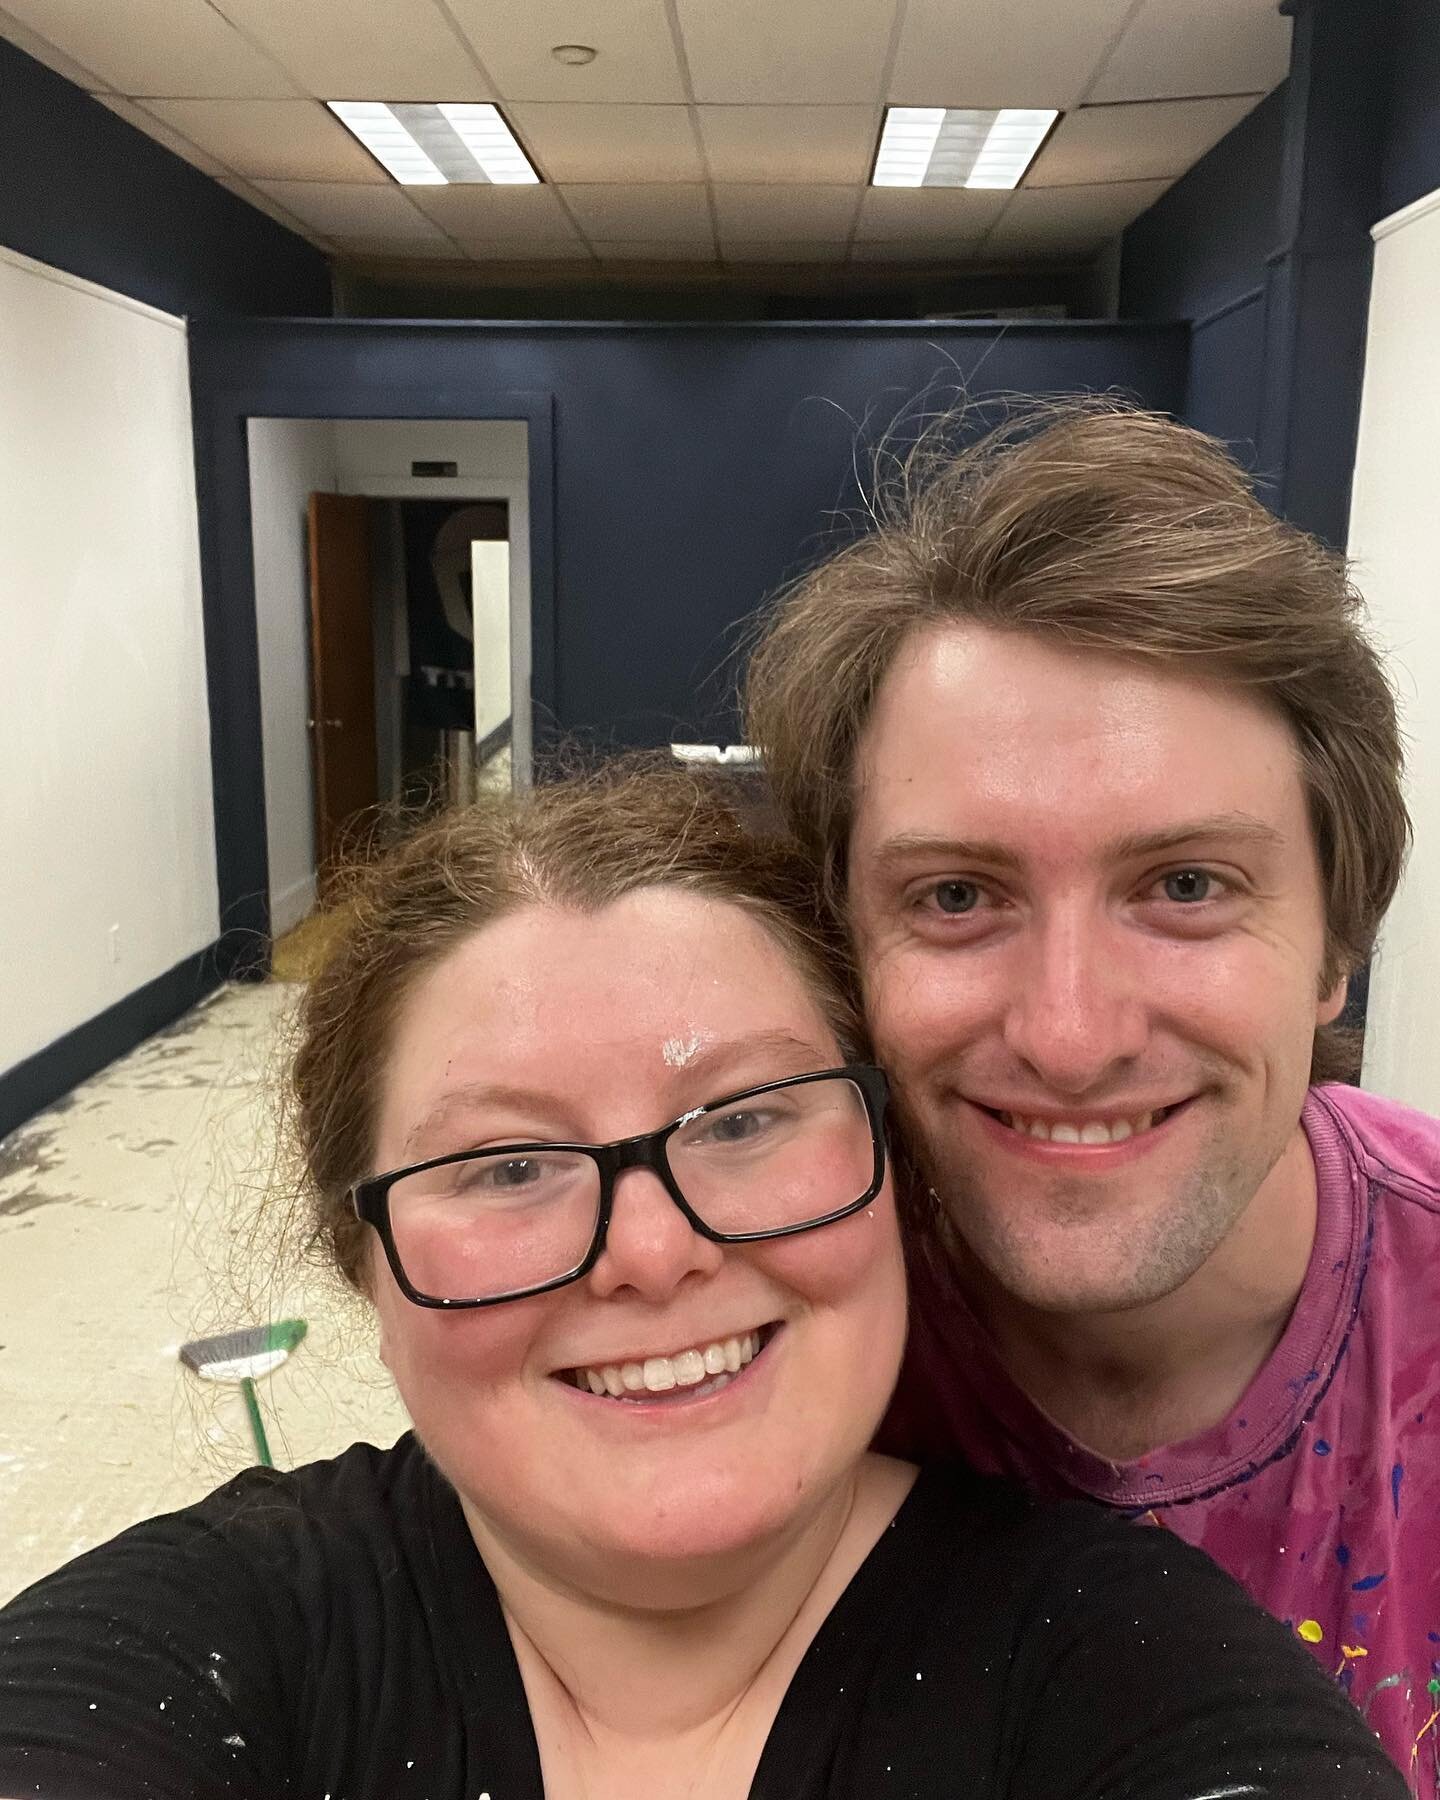 The new space is finally starting to look nice! We painted until 2am to get ready for the floors coming in tomorrow (technically now today in five hours). We&rsquo;ll post some pictures of the new space with the floors installed in the evening. 

&he